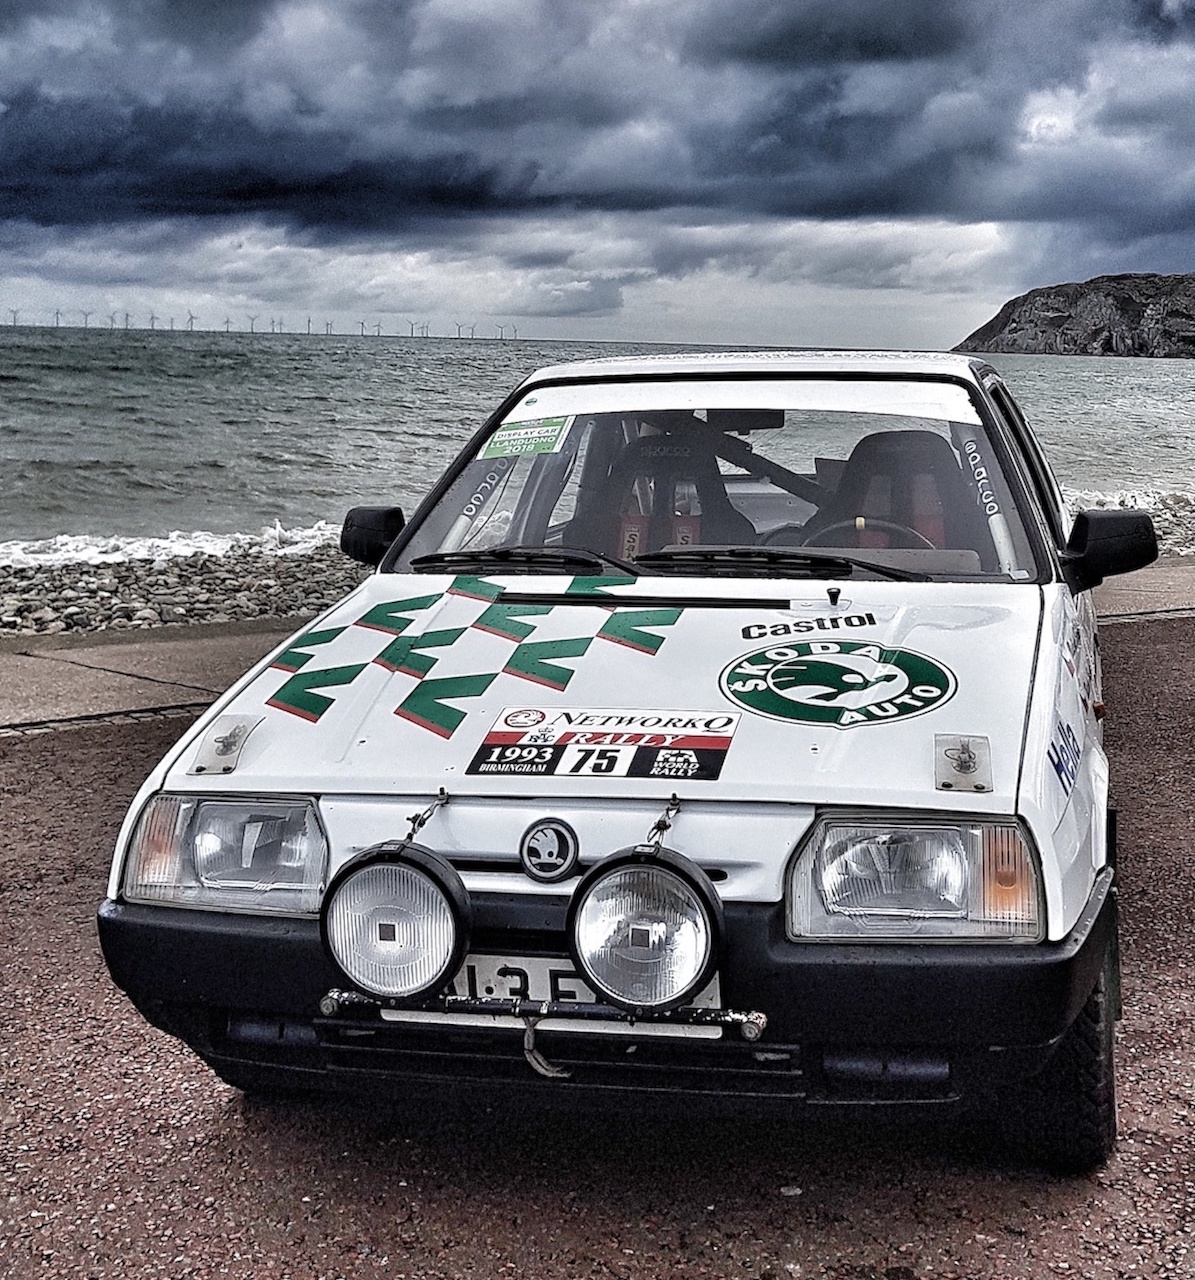 75th Rally GB to Honour Rally Heroes